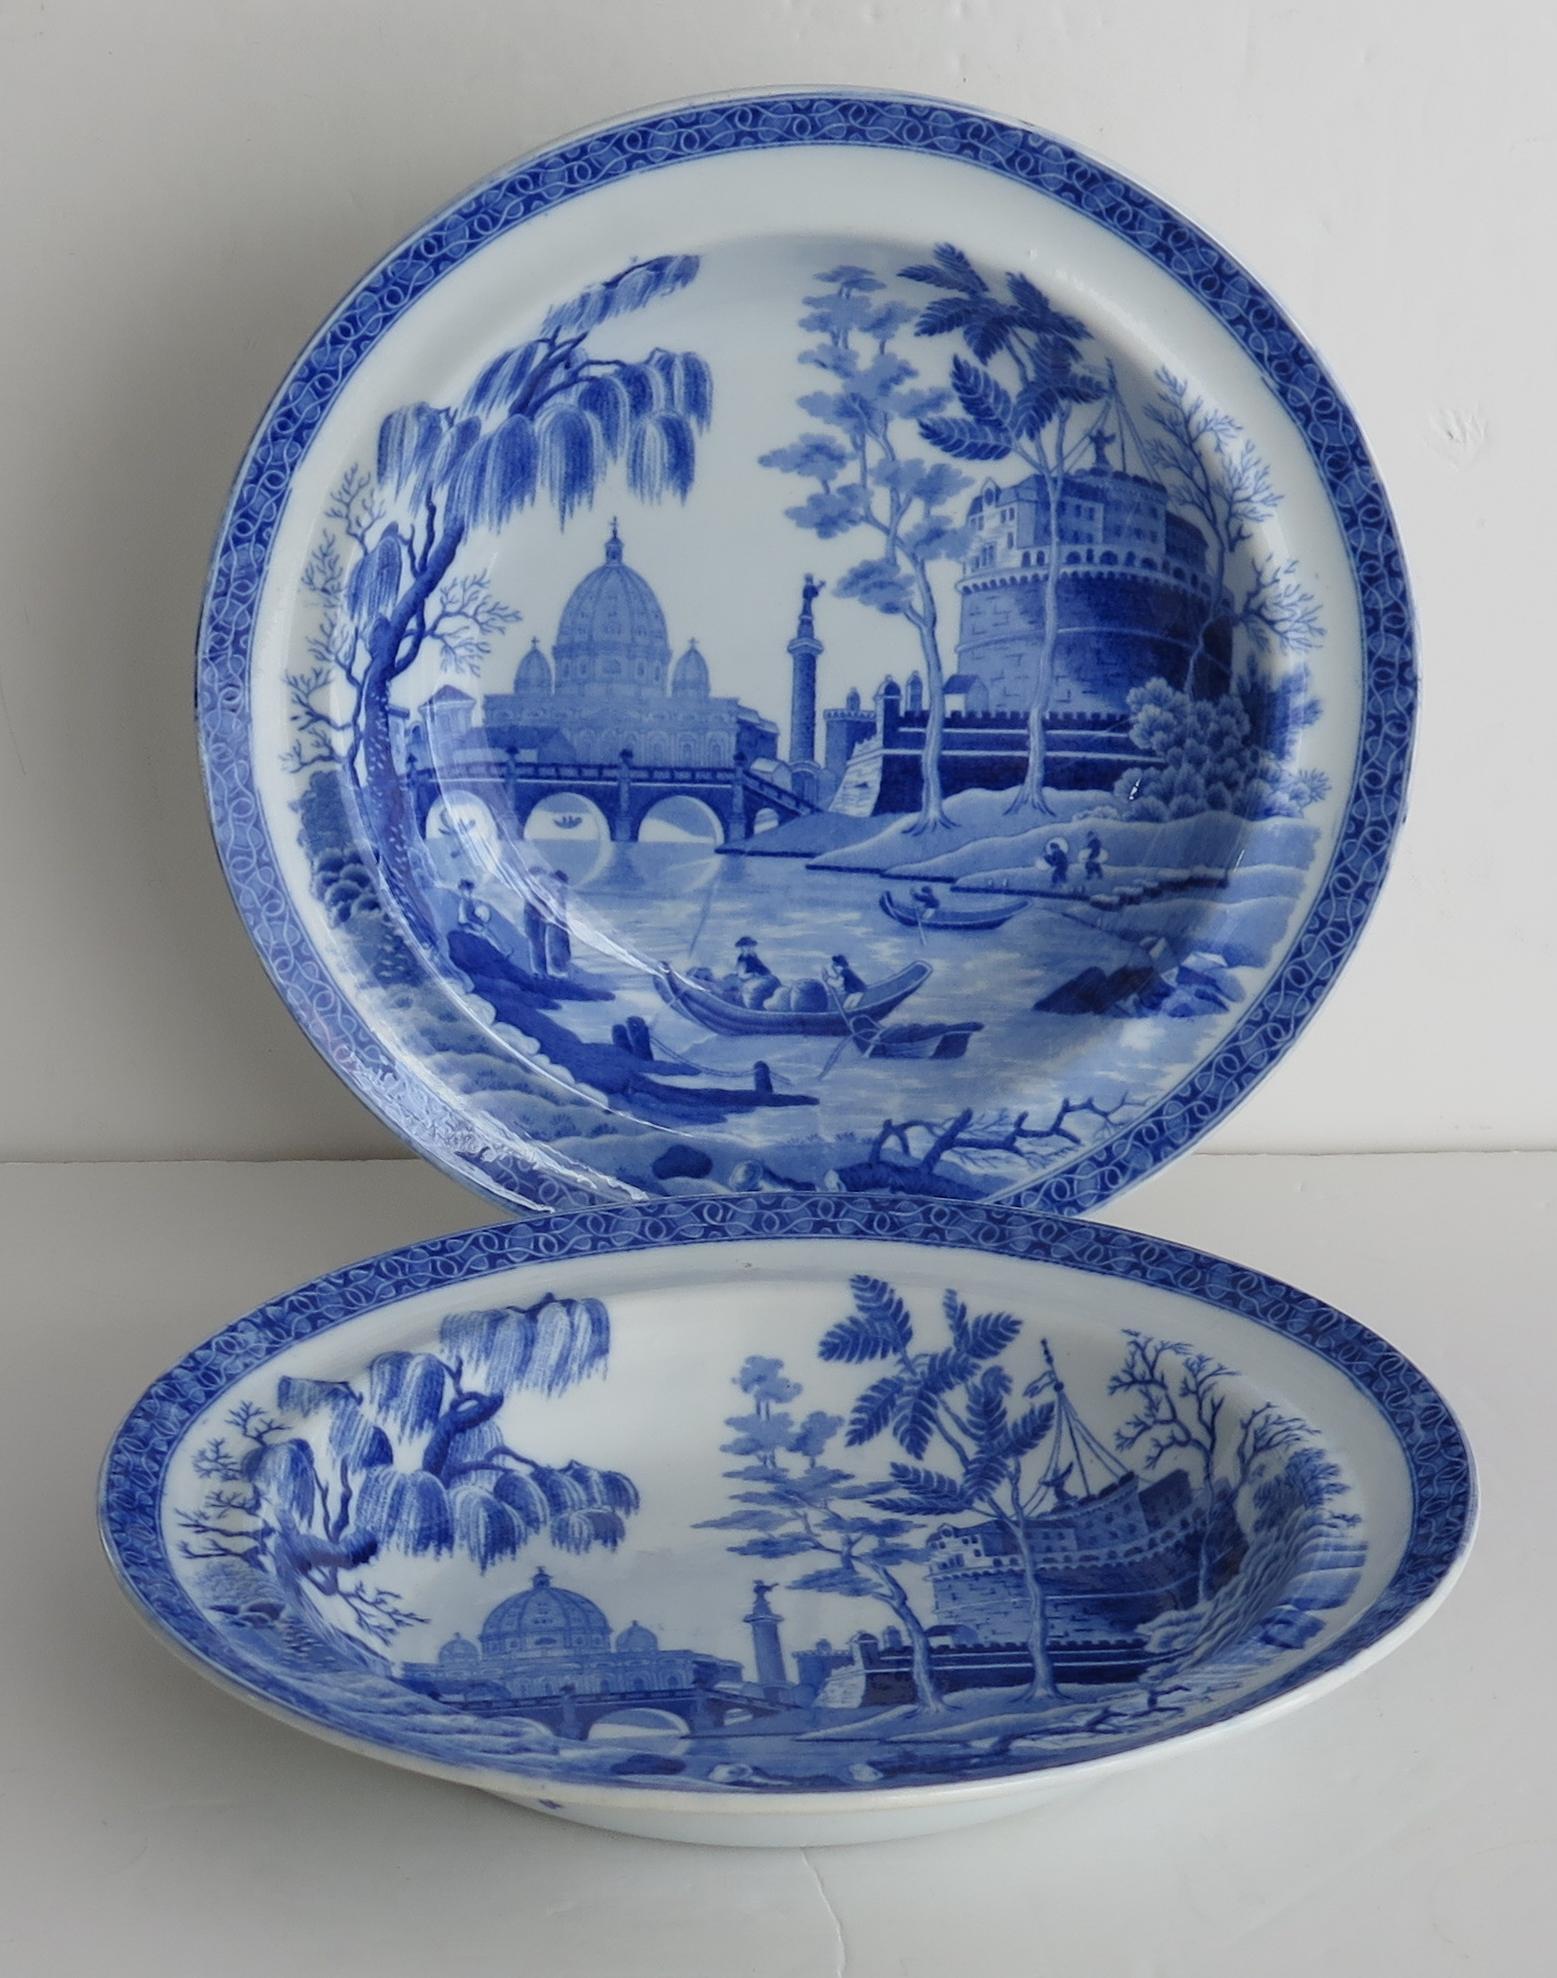 This is a beautiful pair of deep plates or Soup Bowls in the blue and white Rome or Tiber Pattern, produced by the Spode factory and made of a type of earthenware pottery called Pearl-ware, in the early 19th century, circa 1815.

The pattern view